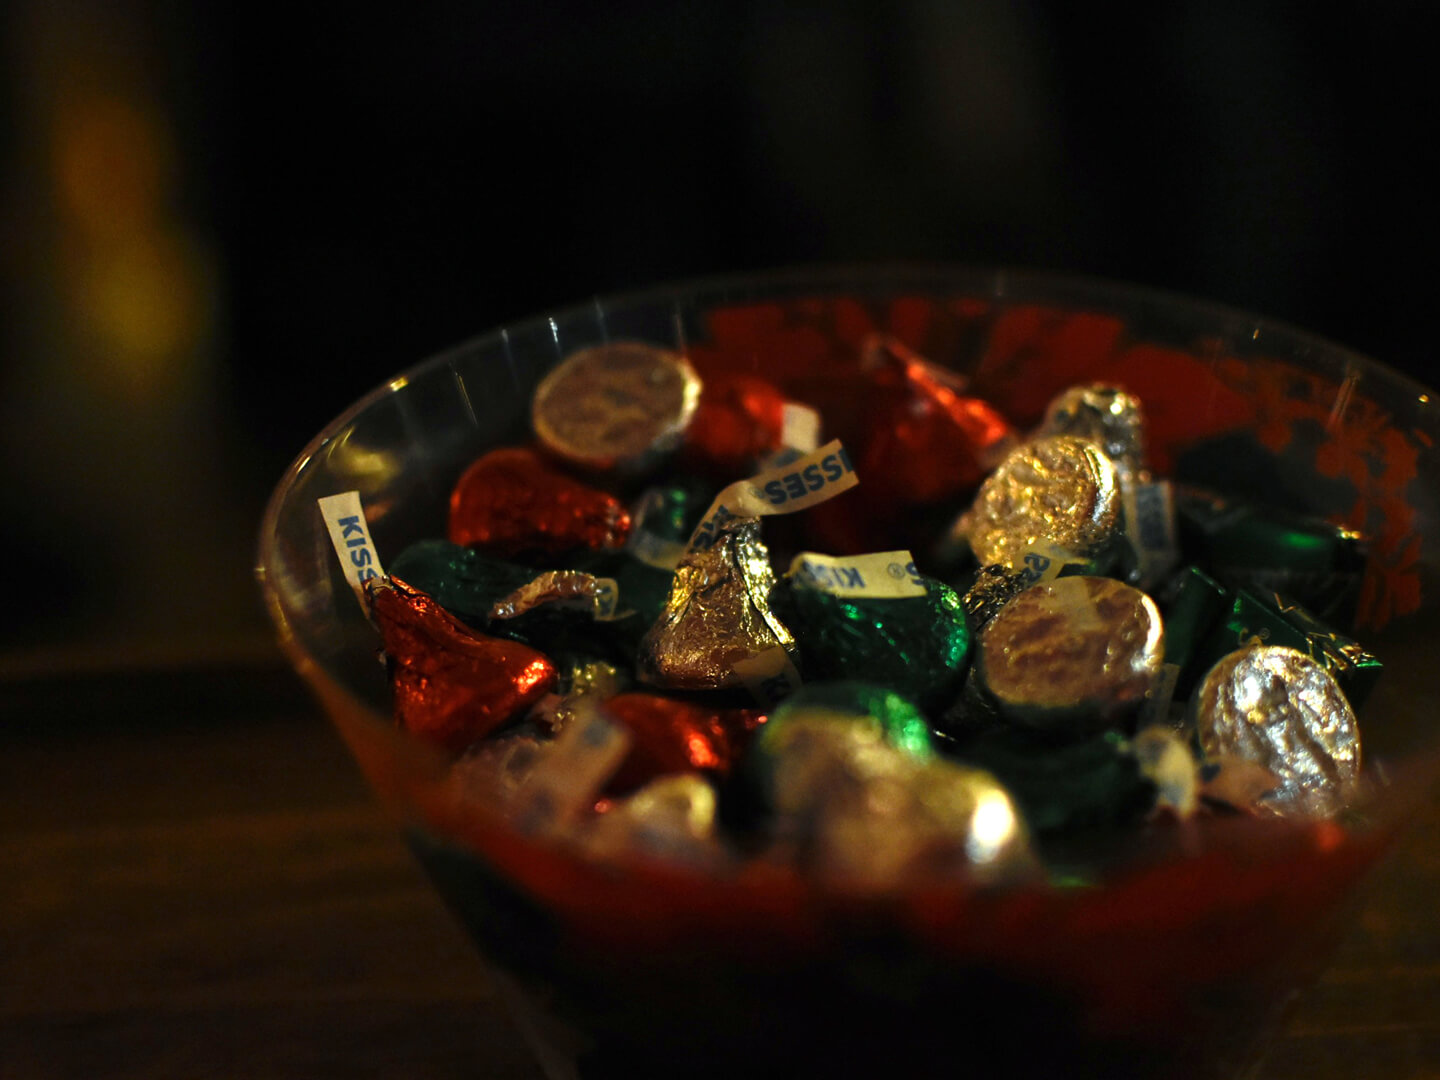 A bowl of Hershey Kisses in Christmas colors